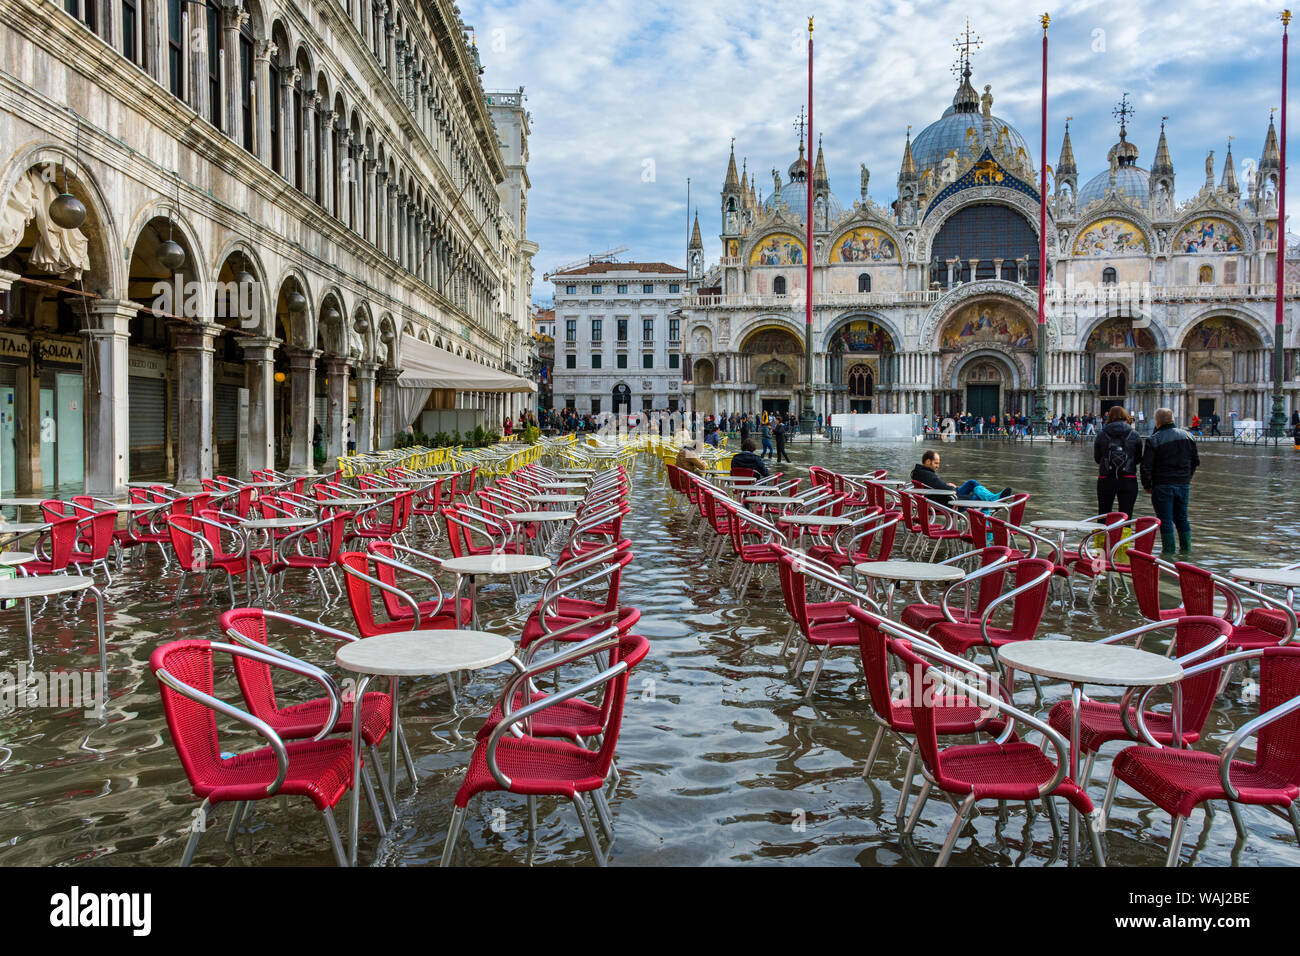 Tables and chairs at the Procuratie Vecchie and the Basilica di San Marco, during an Acqua alta (high water) event, Saint Mark's Square, Venice, Italy Stock Photo